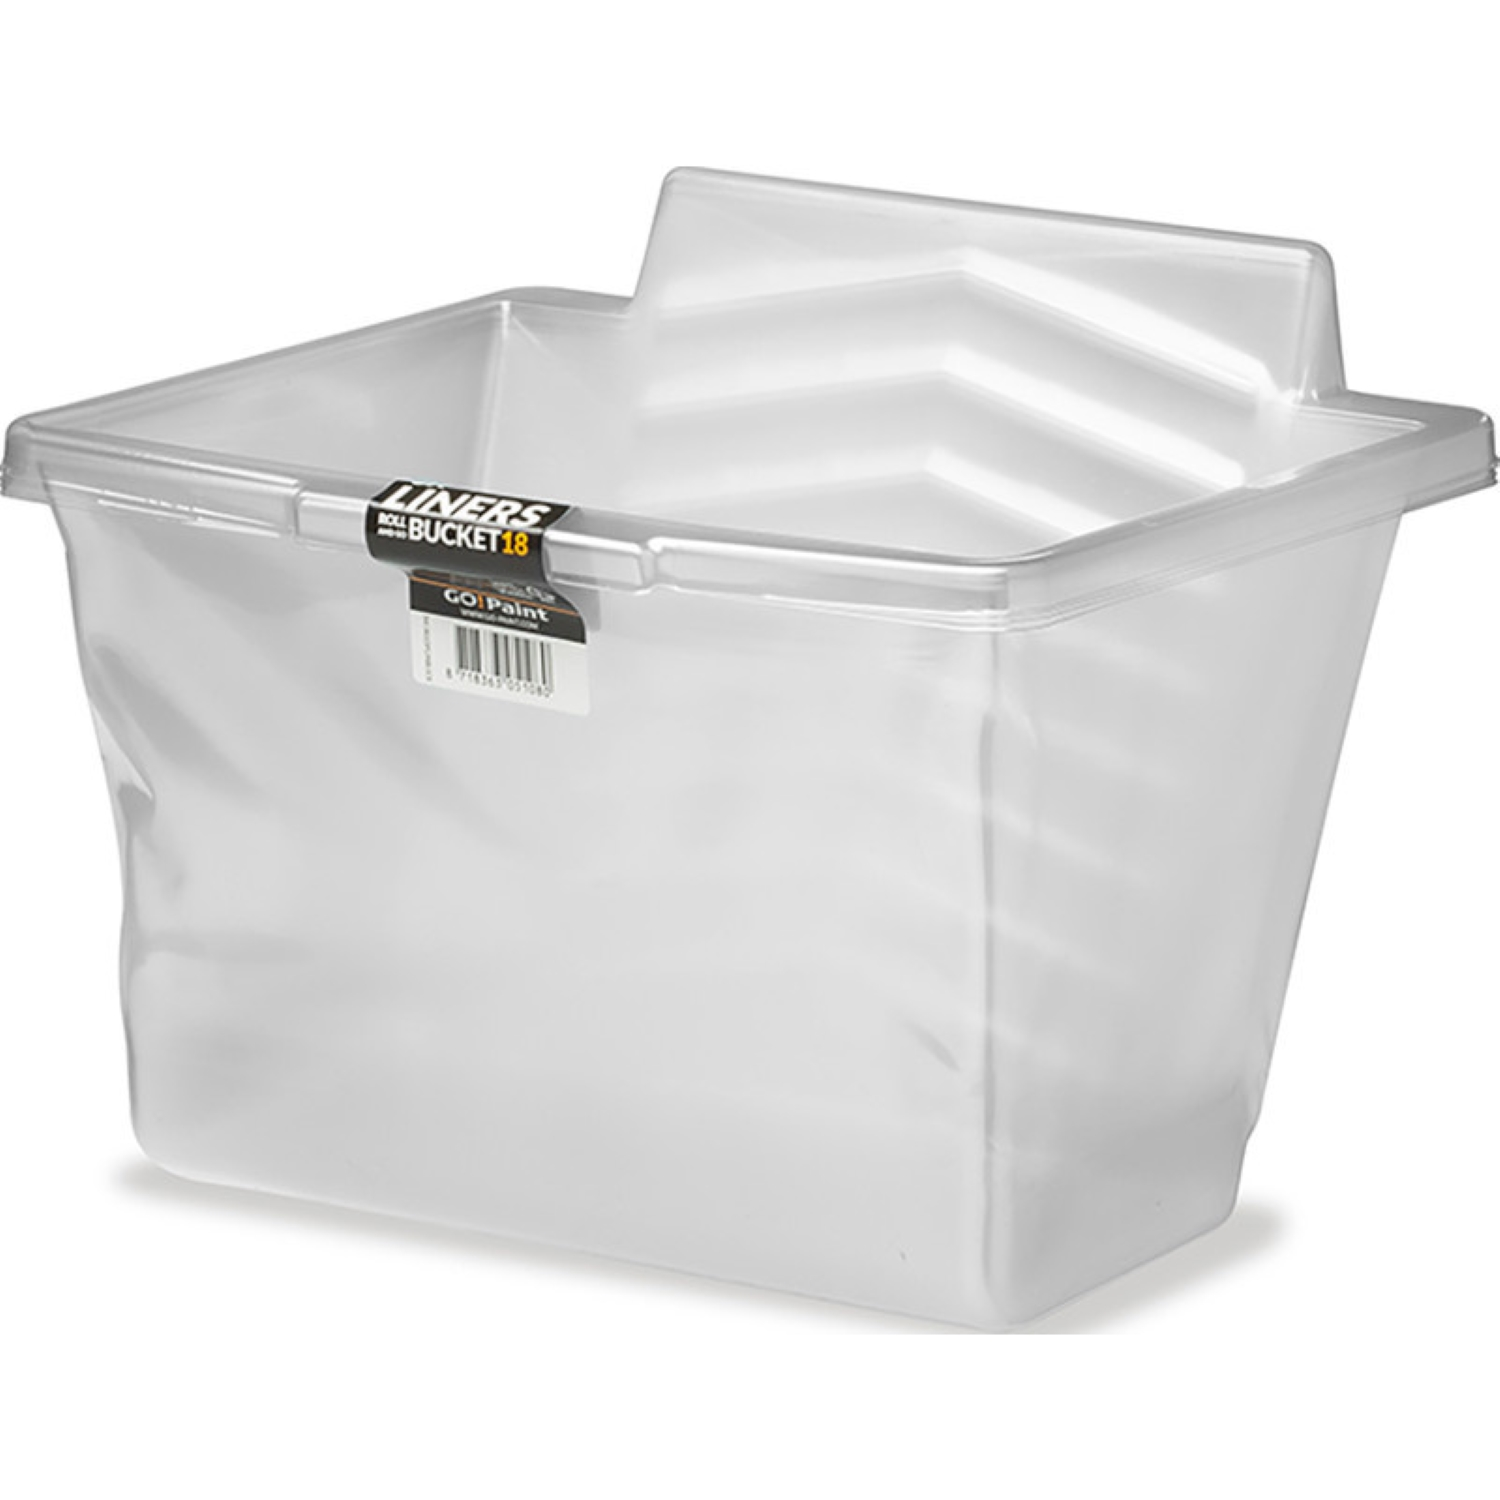 Go!Paint Roll And Go Liner tbv Bucket 25-image